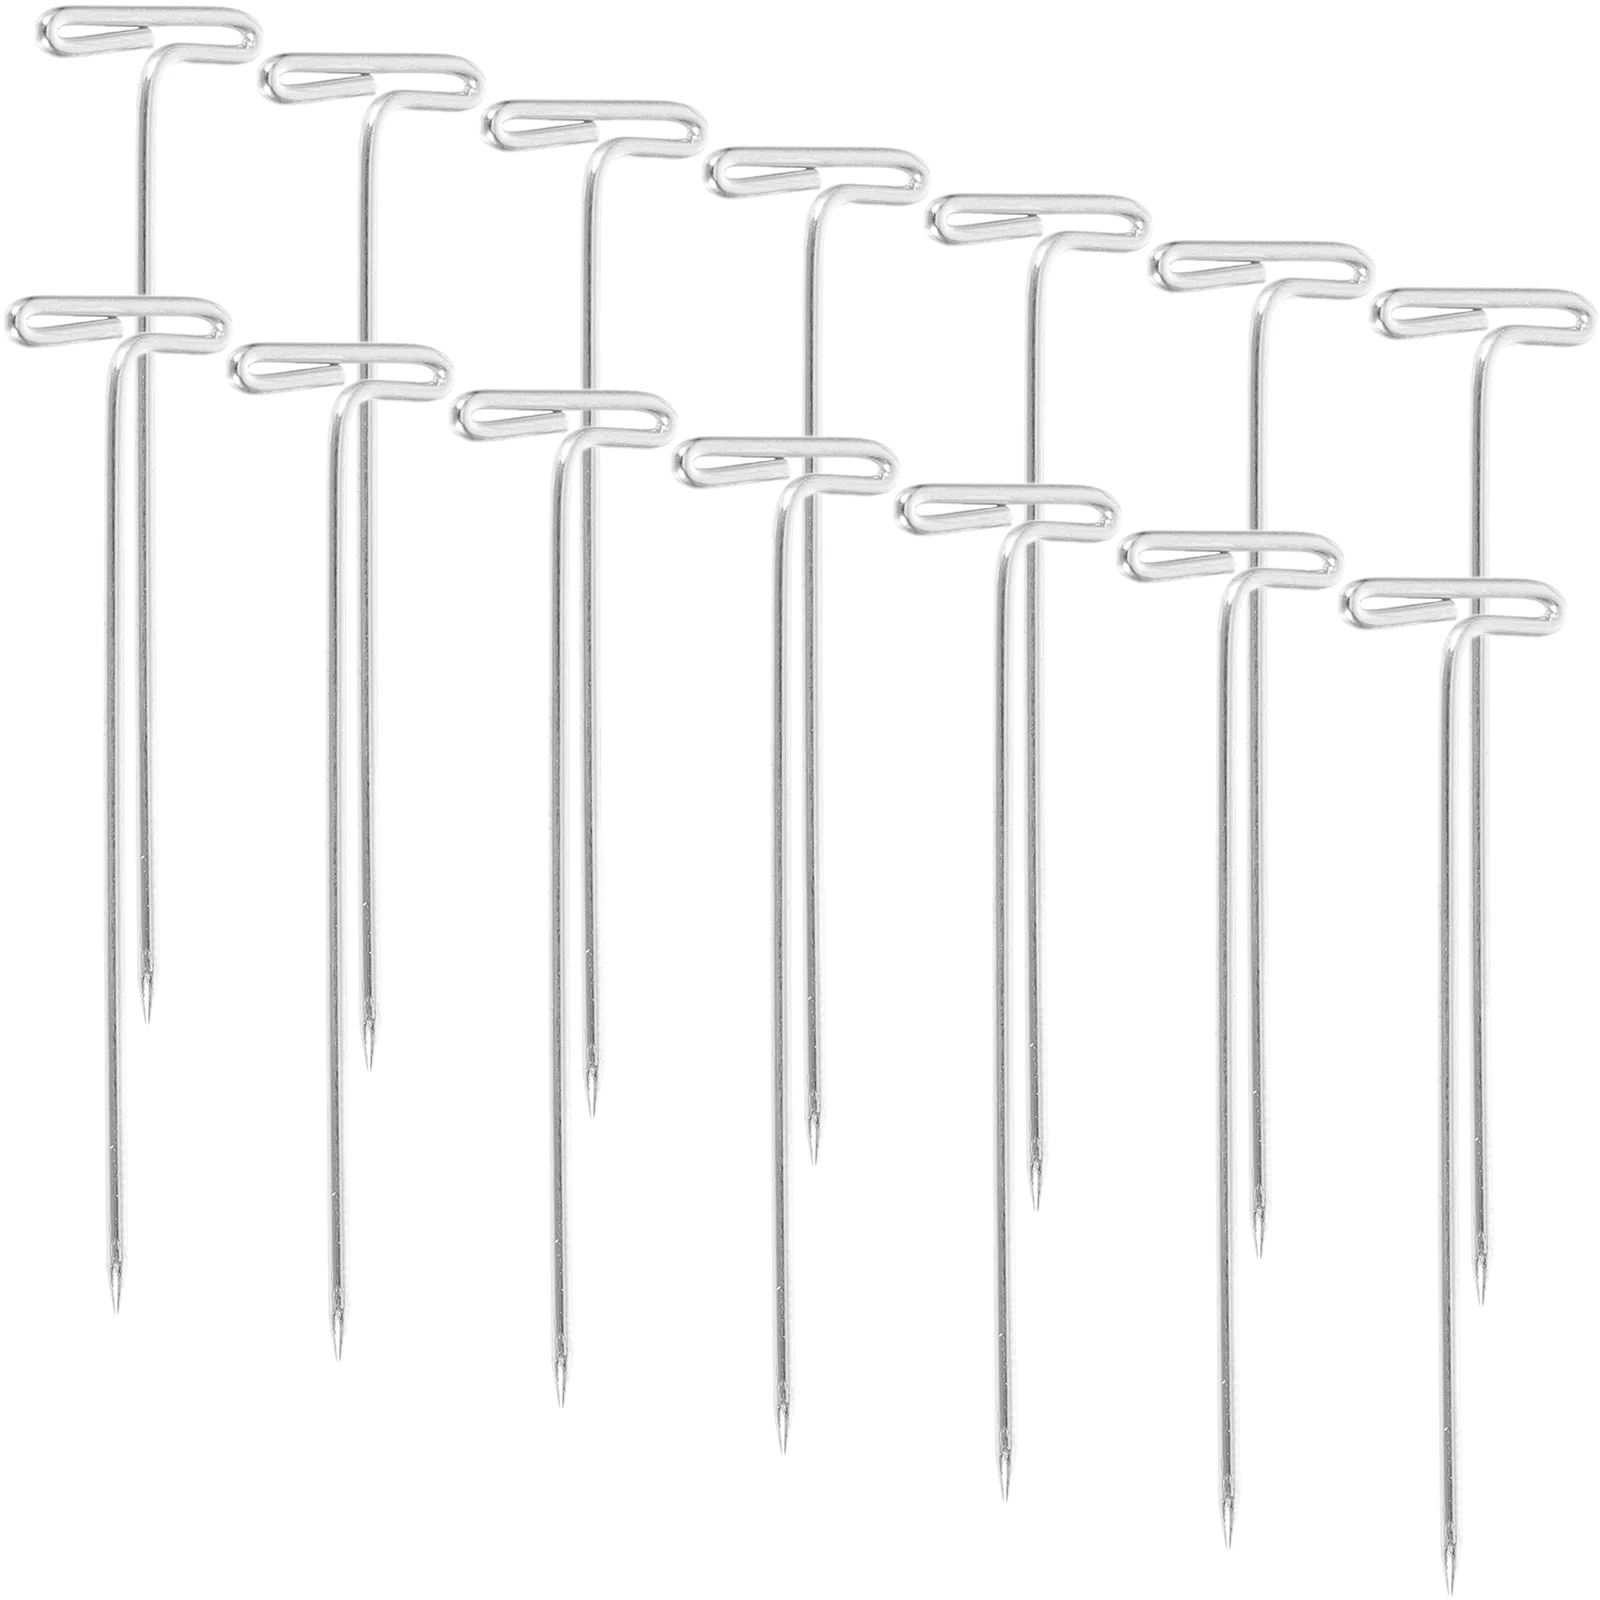 

100 Pcs Braided T-pin Straight Pins Blocking Crocheting Essentials Mannequin Head Sewing Fabric Office